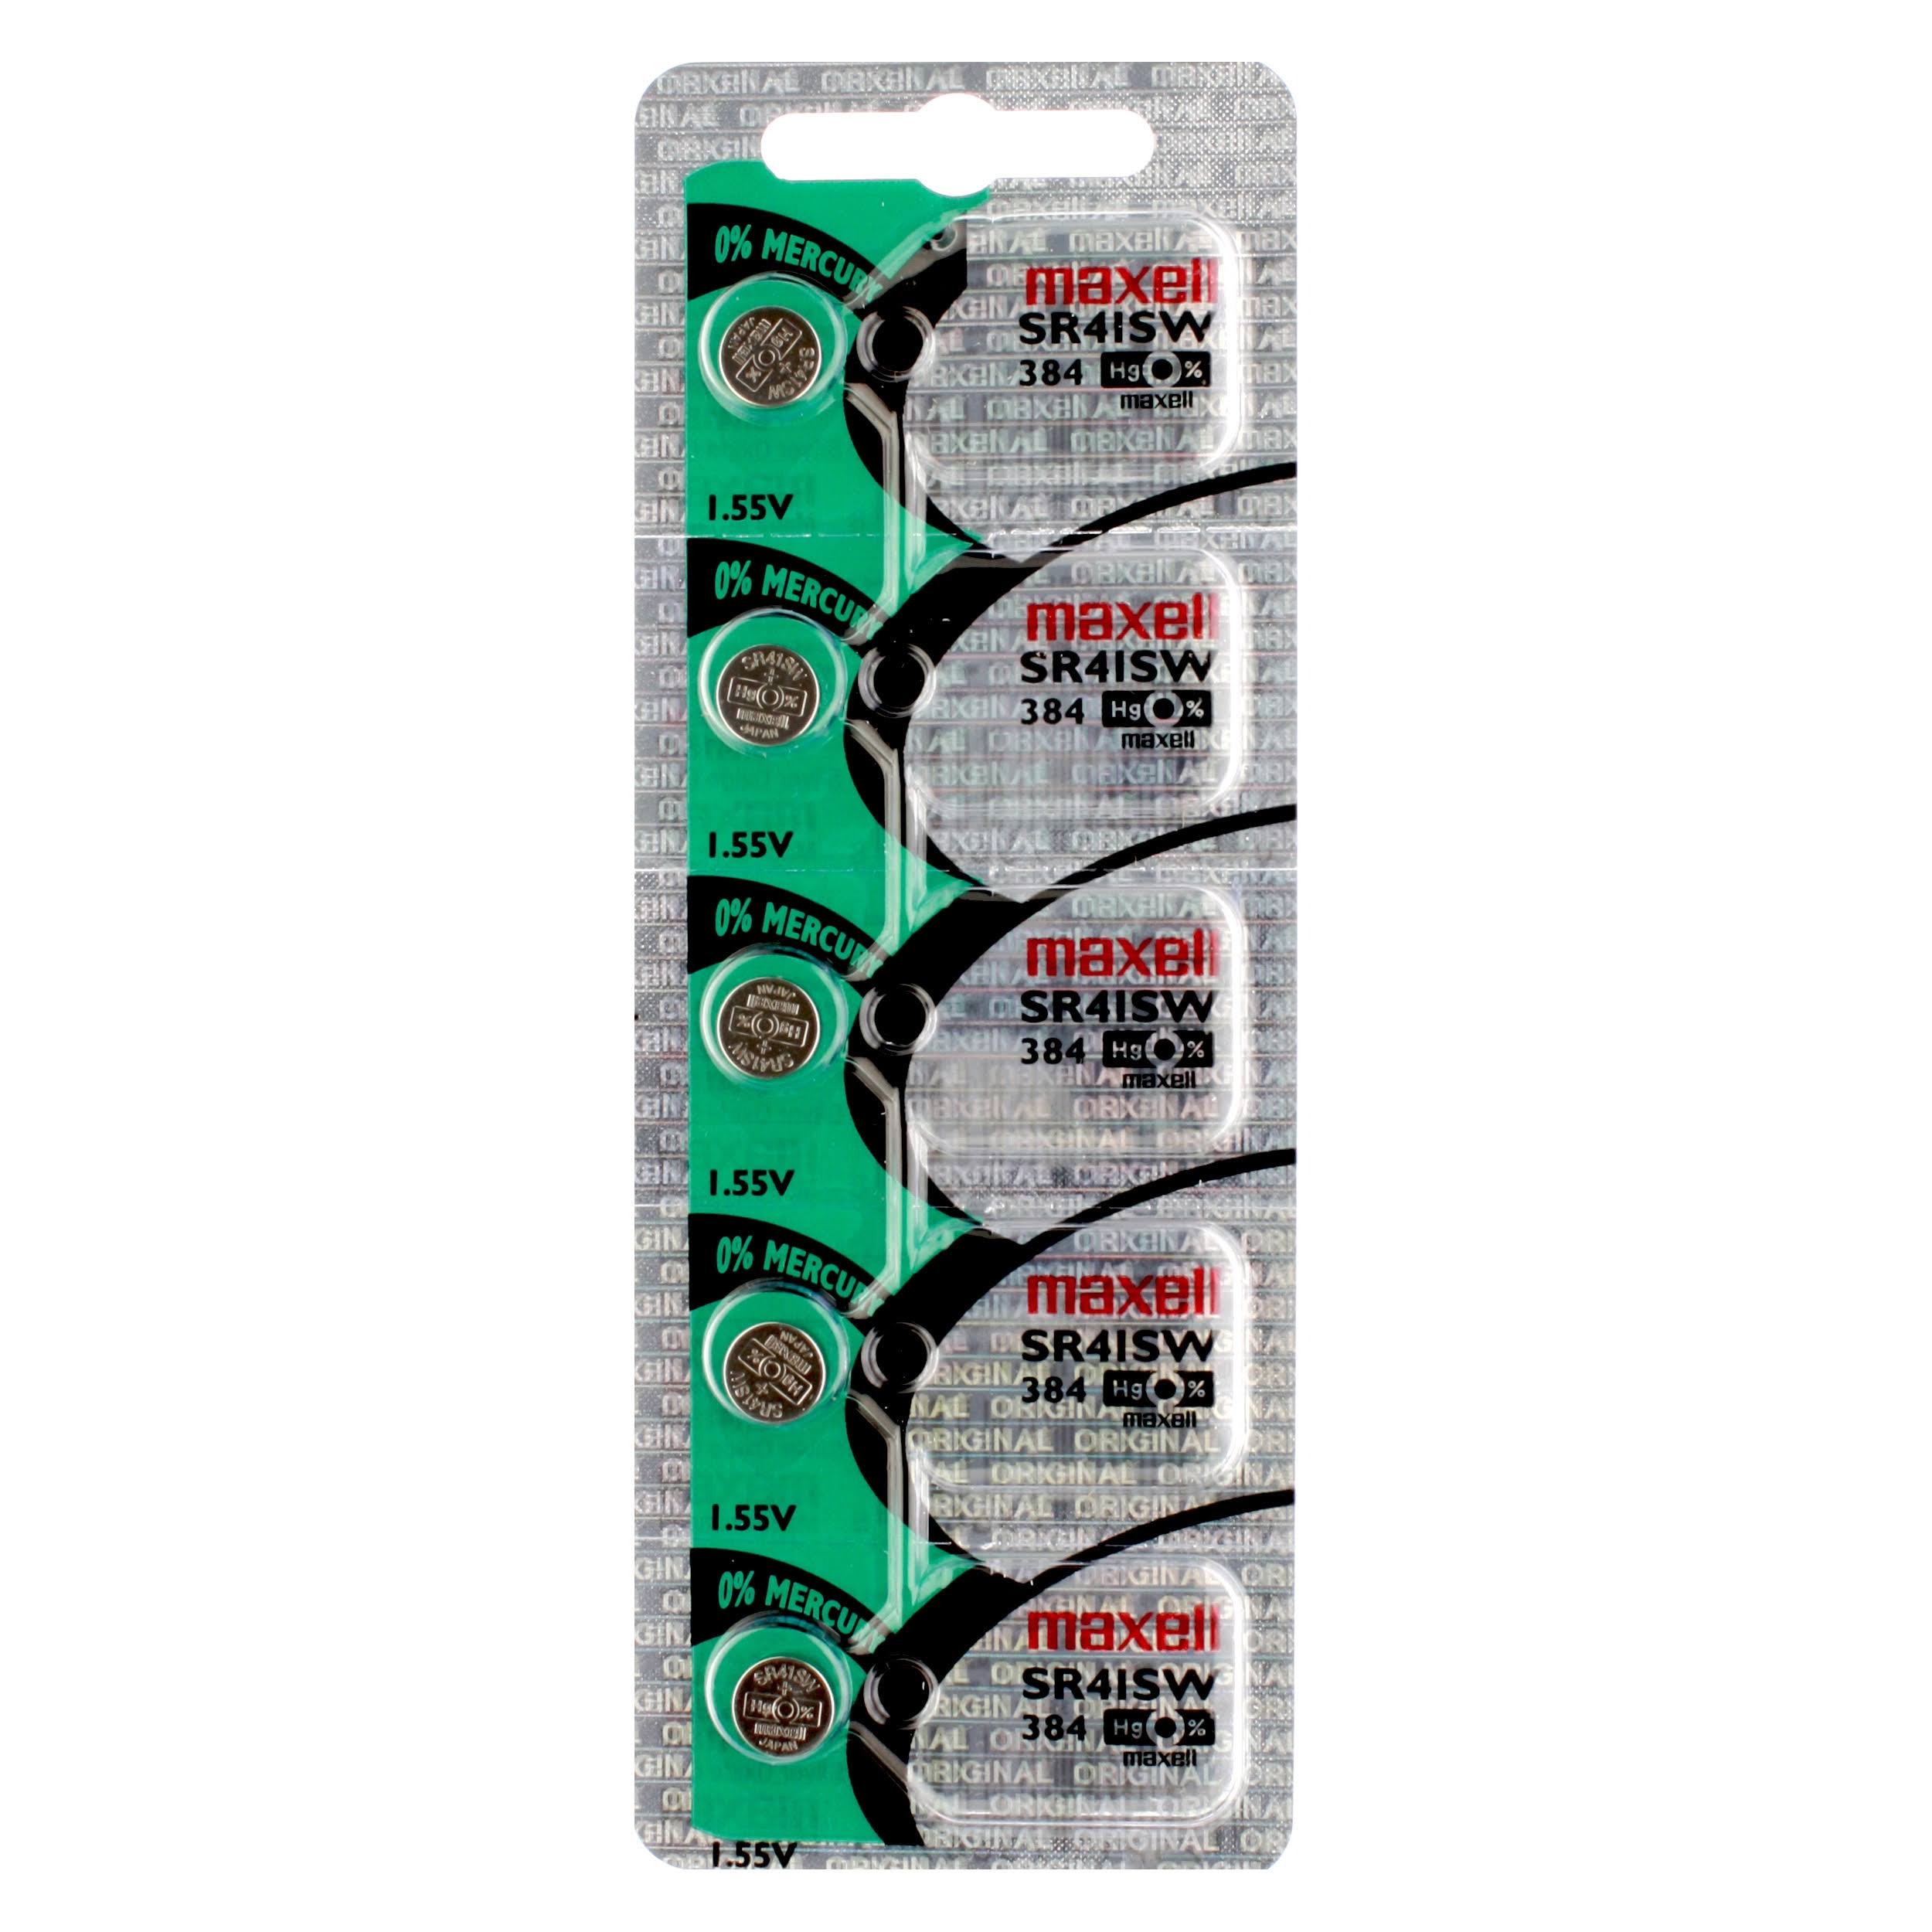 5pk Maxell Silver Oxide Sr41sw High Drain Watch Battery replaces 384, 392, MD384 | by BatteriesInAFlash.com